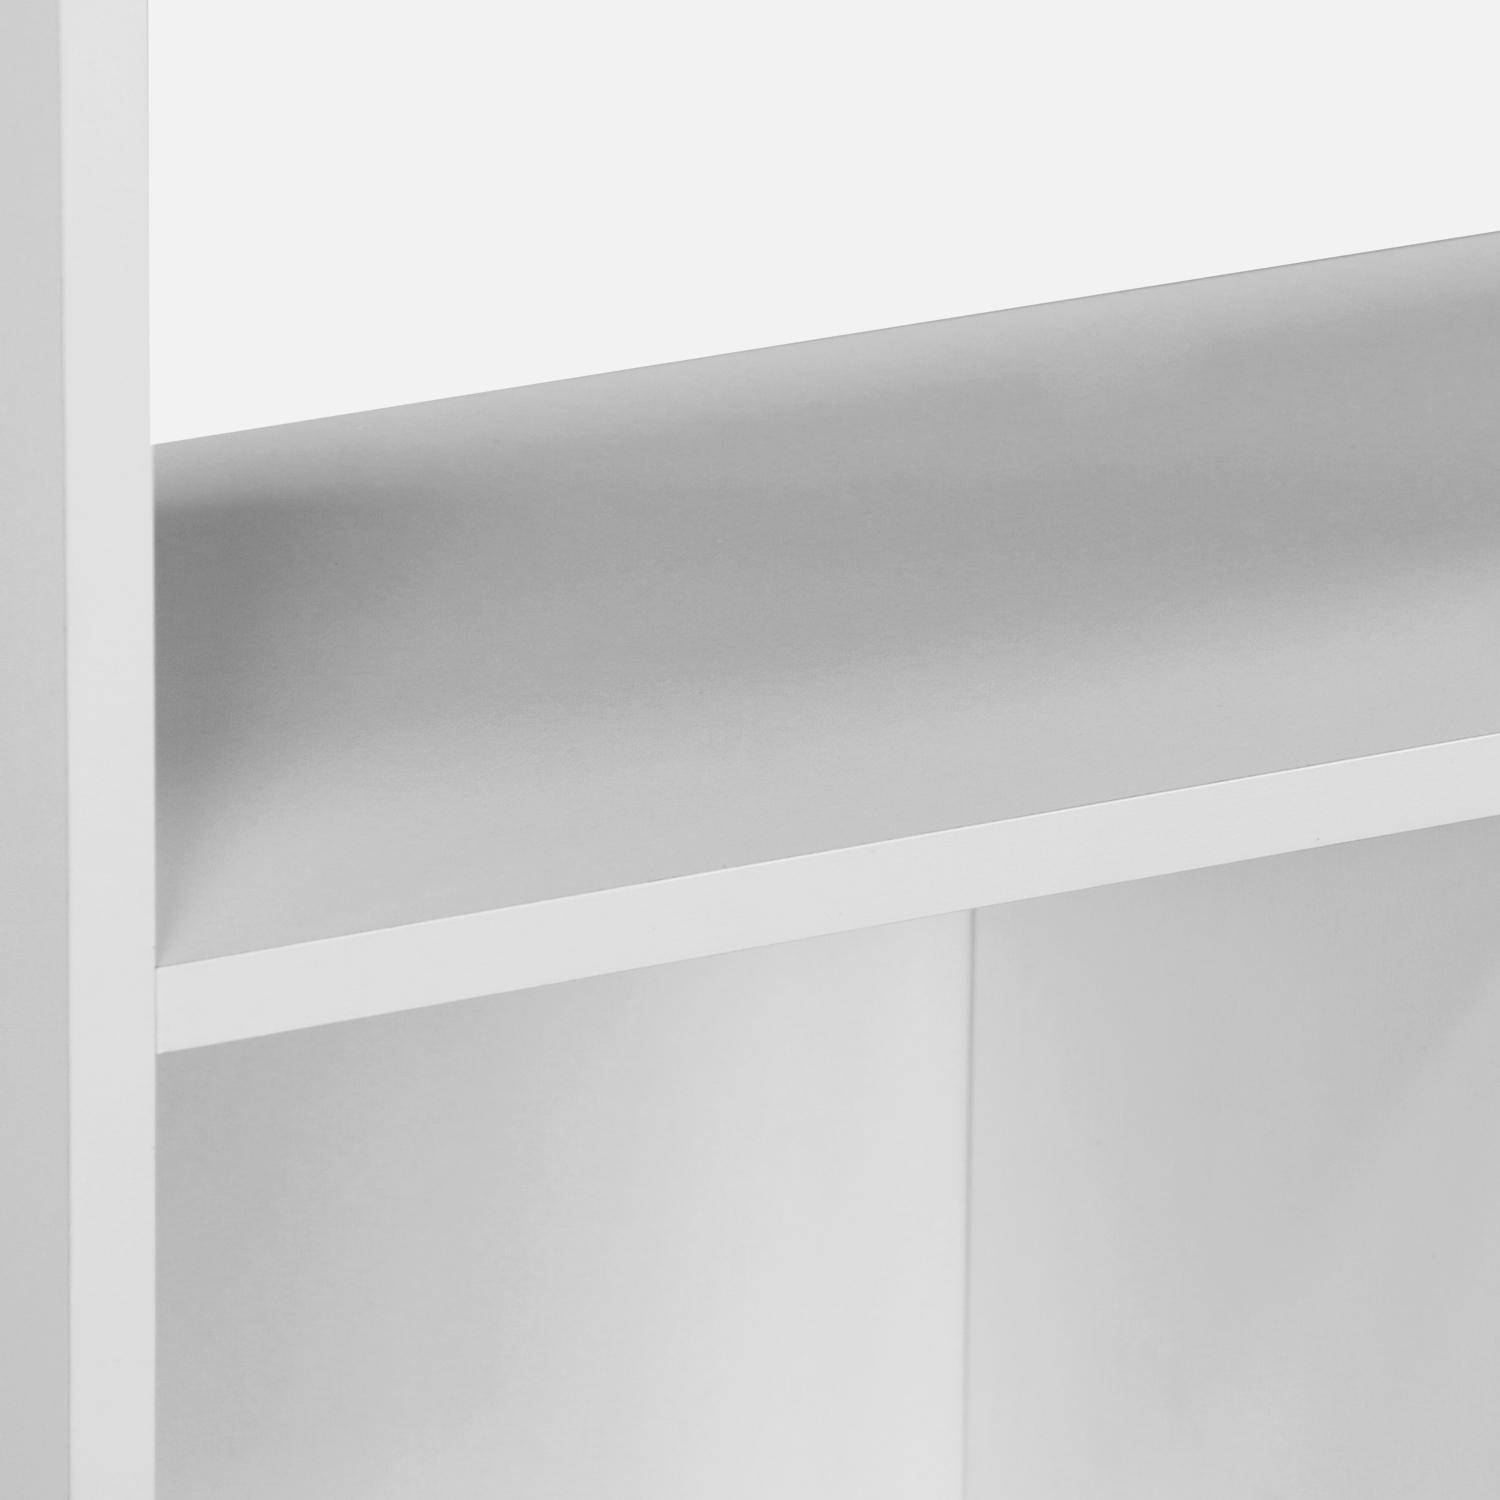 3-shelf bookcase with 6 compartments, white, L83xW23xH80cm, Pieter,sweeek,Photo4